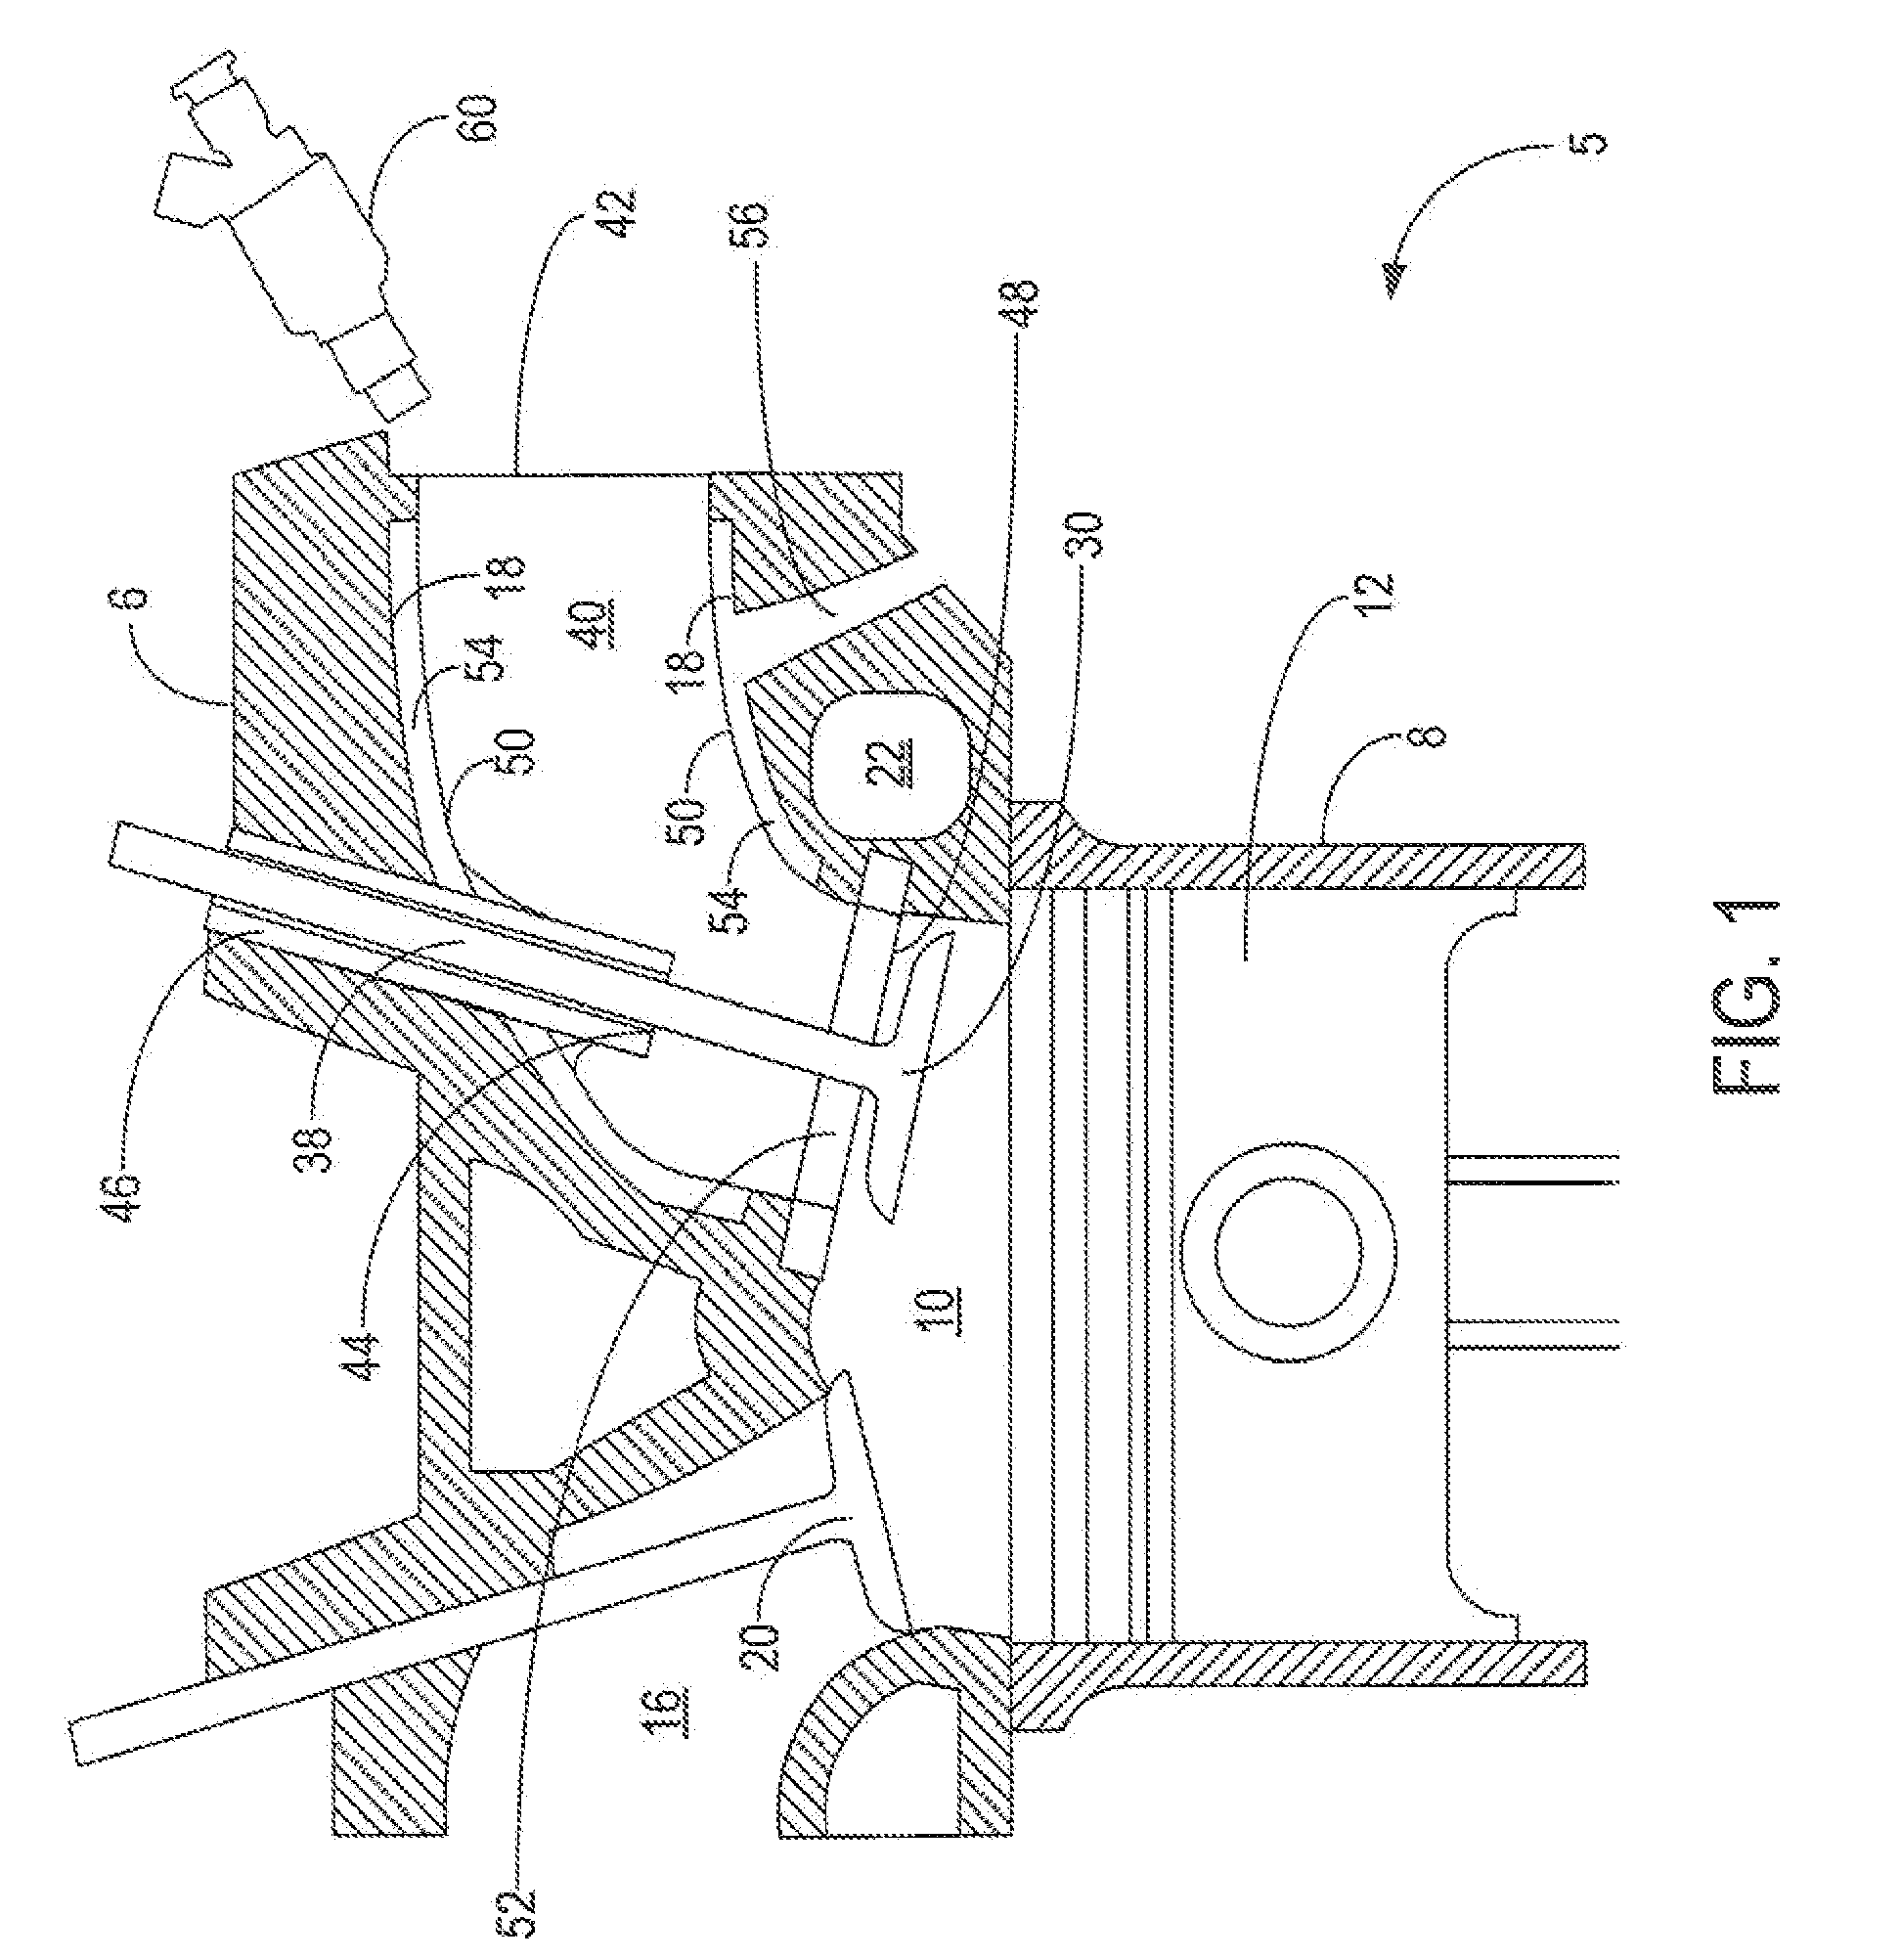 Low-thermal-inertia intake ports for port-injected, spark ignition engines and an associated manufacturing method